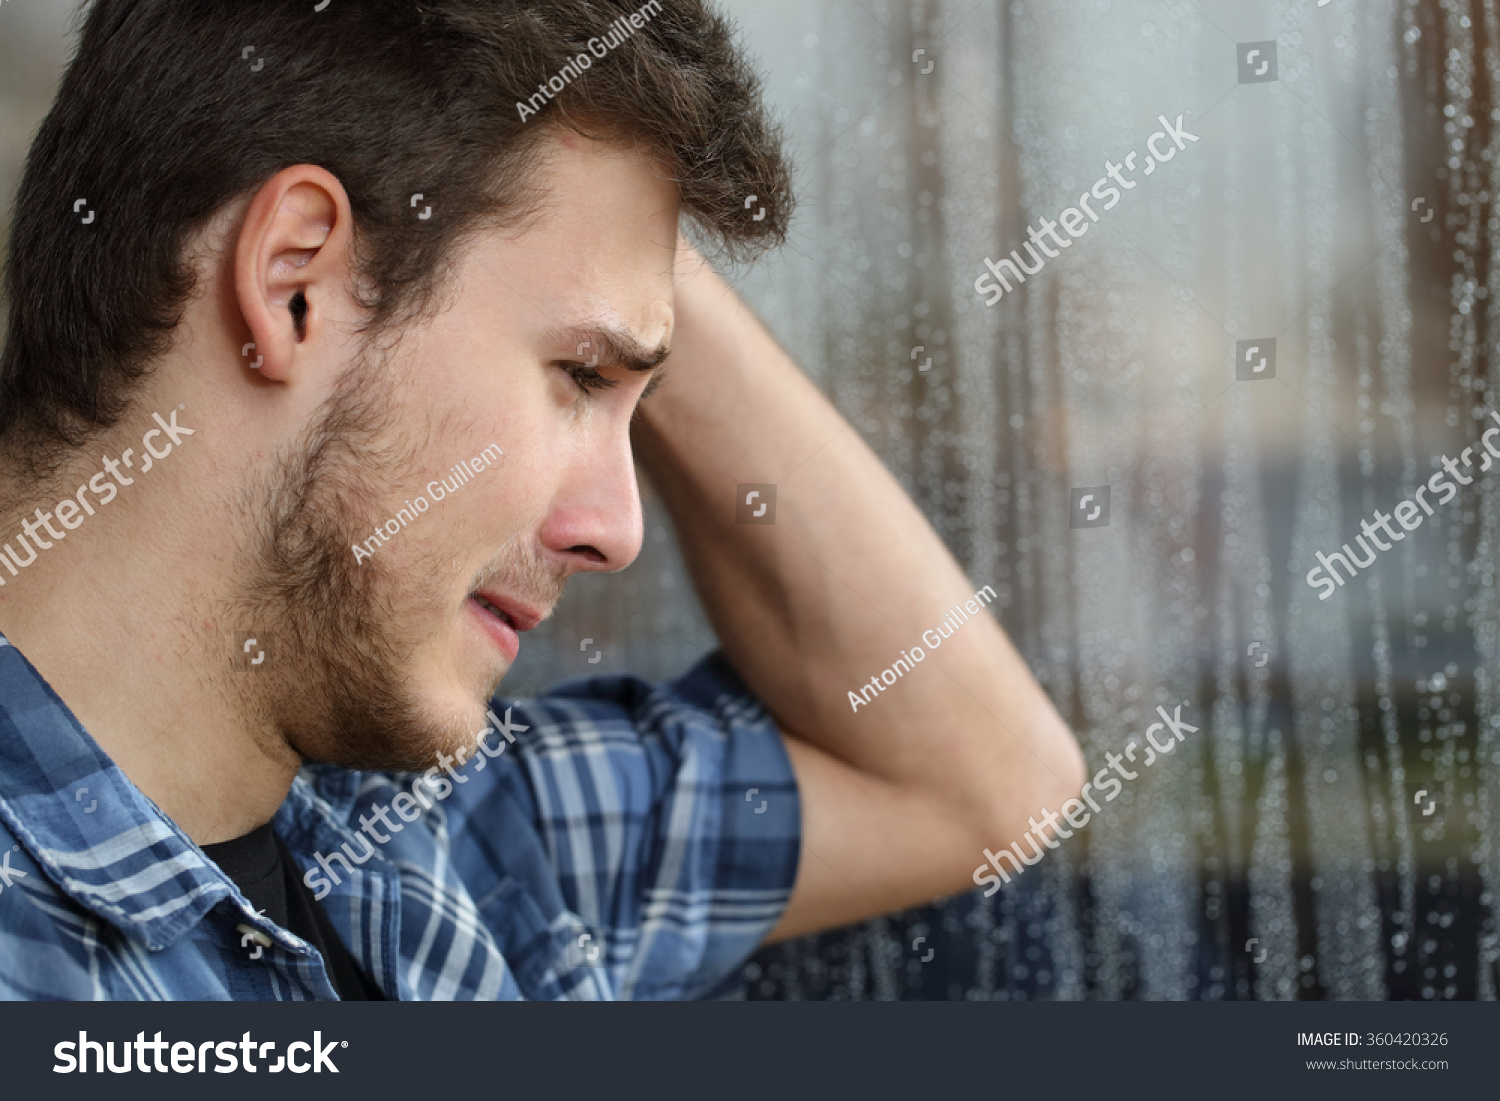 stock-photo-side-view-of-a-sad-man-looki